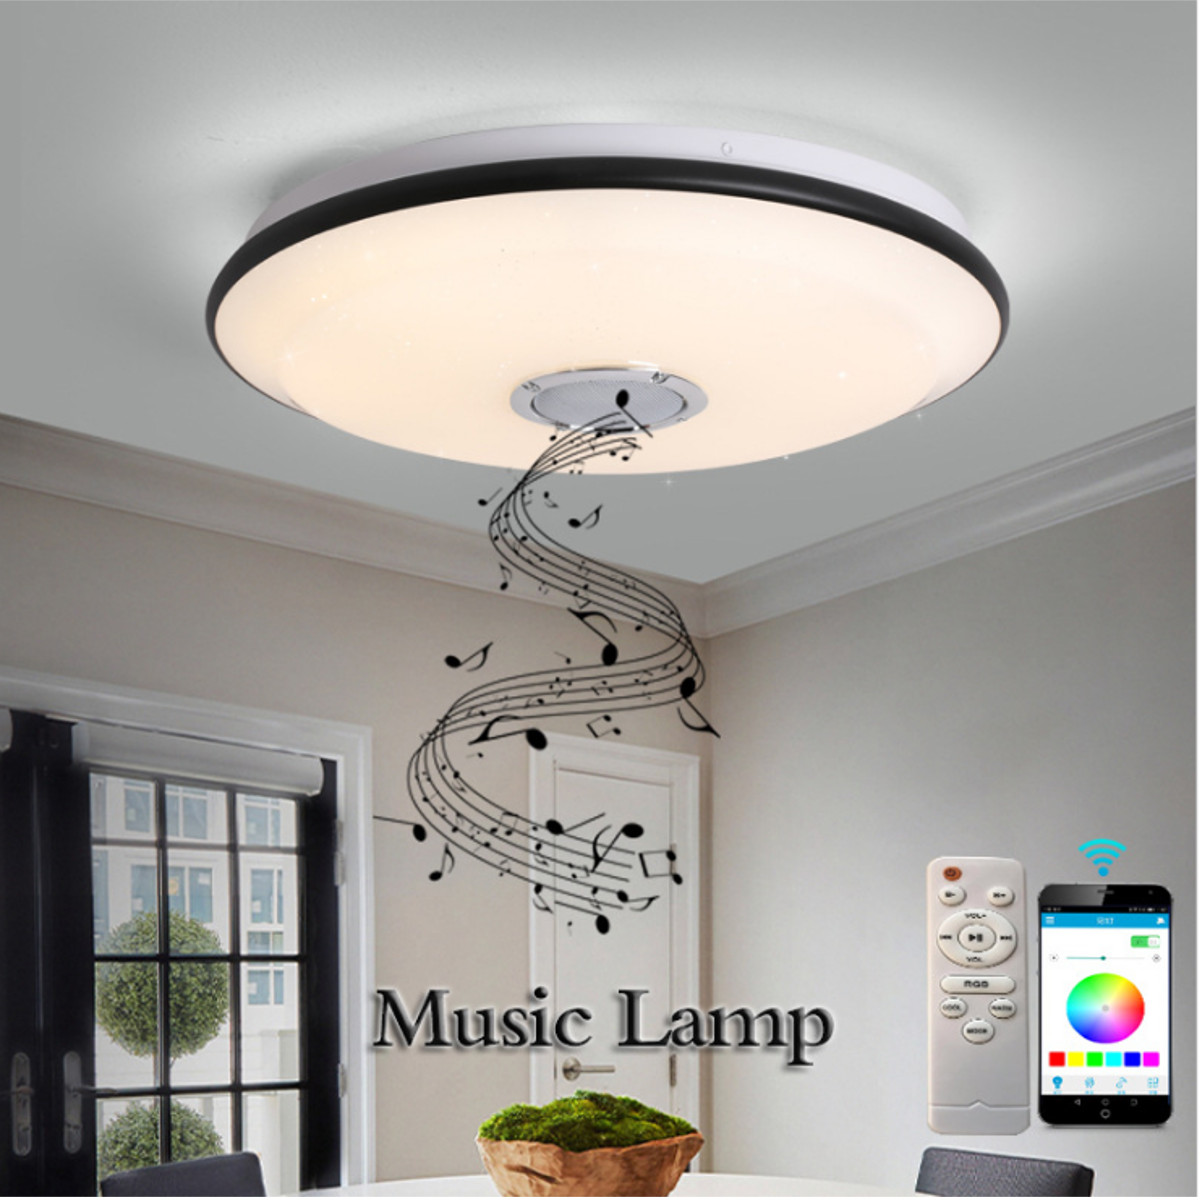 36-60W-LED-RGB-Music-Ceiling-Lamp-bluetooth-APPRemote-Control-Home-Bedroom-Lights-1697181-6